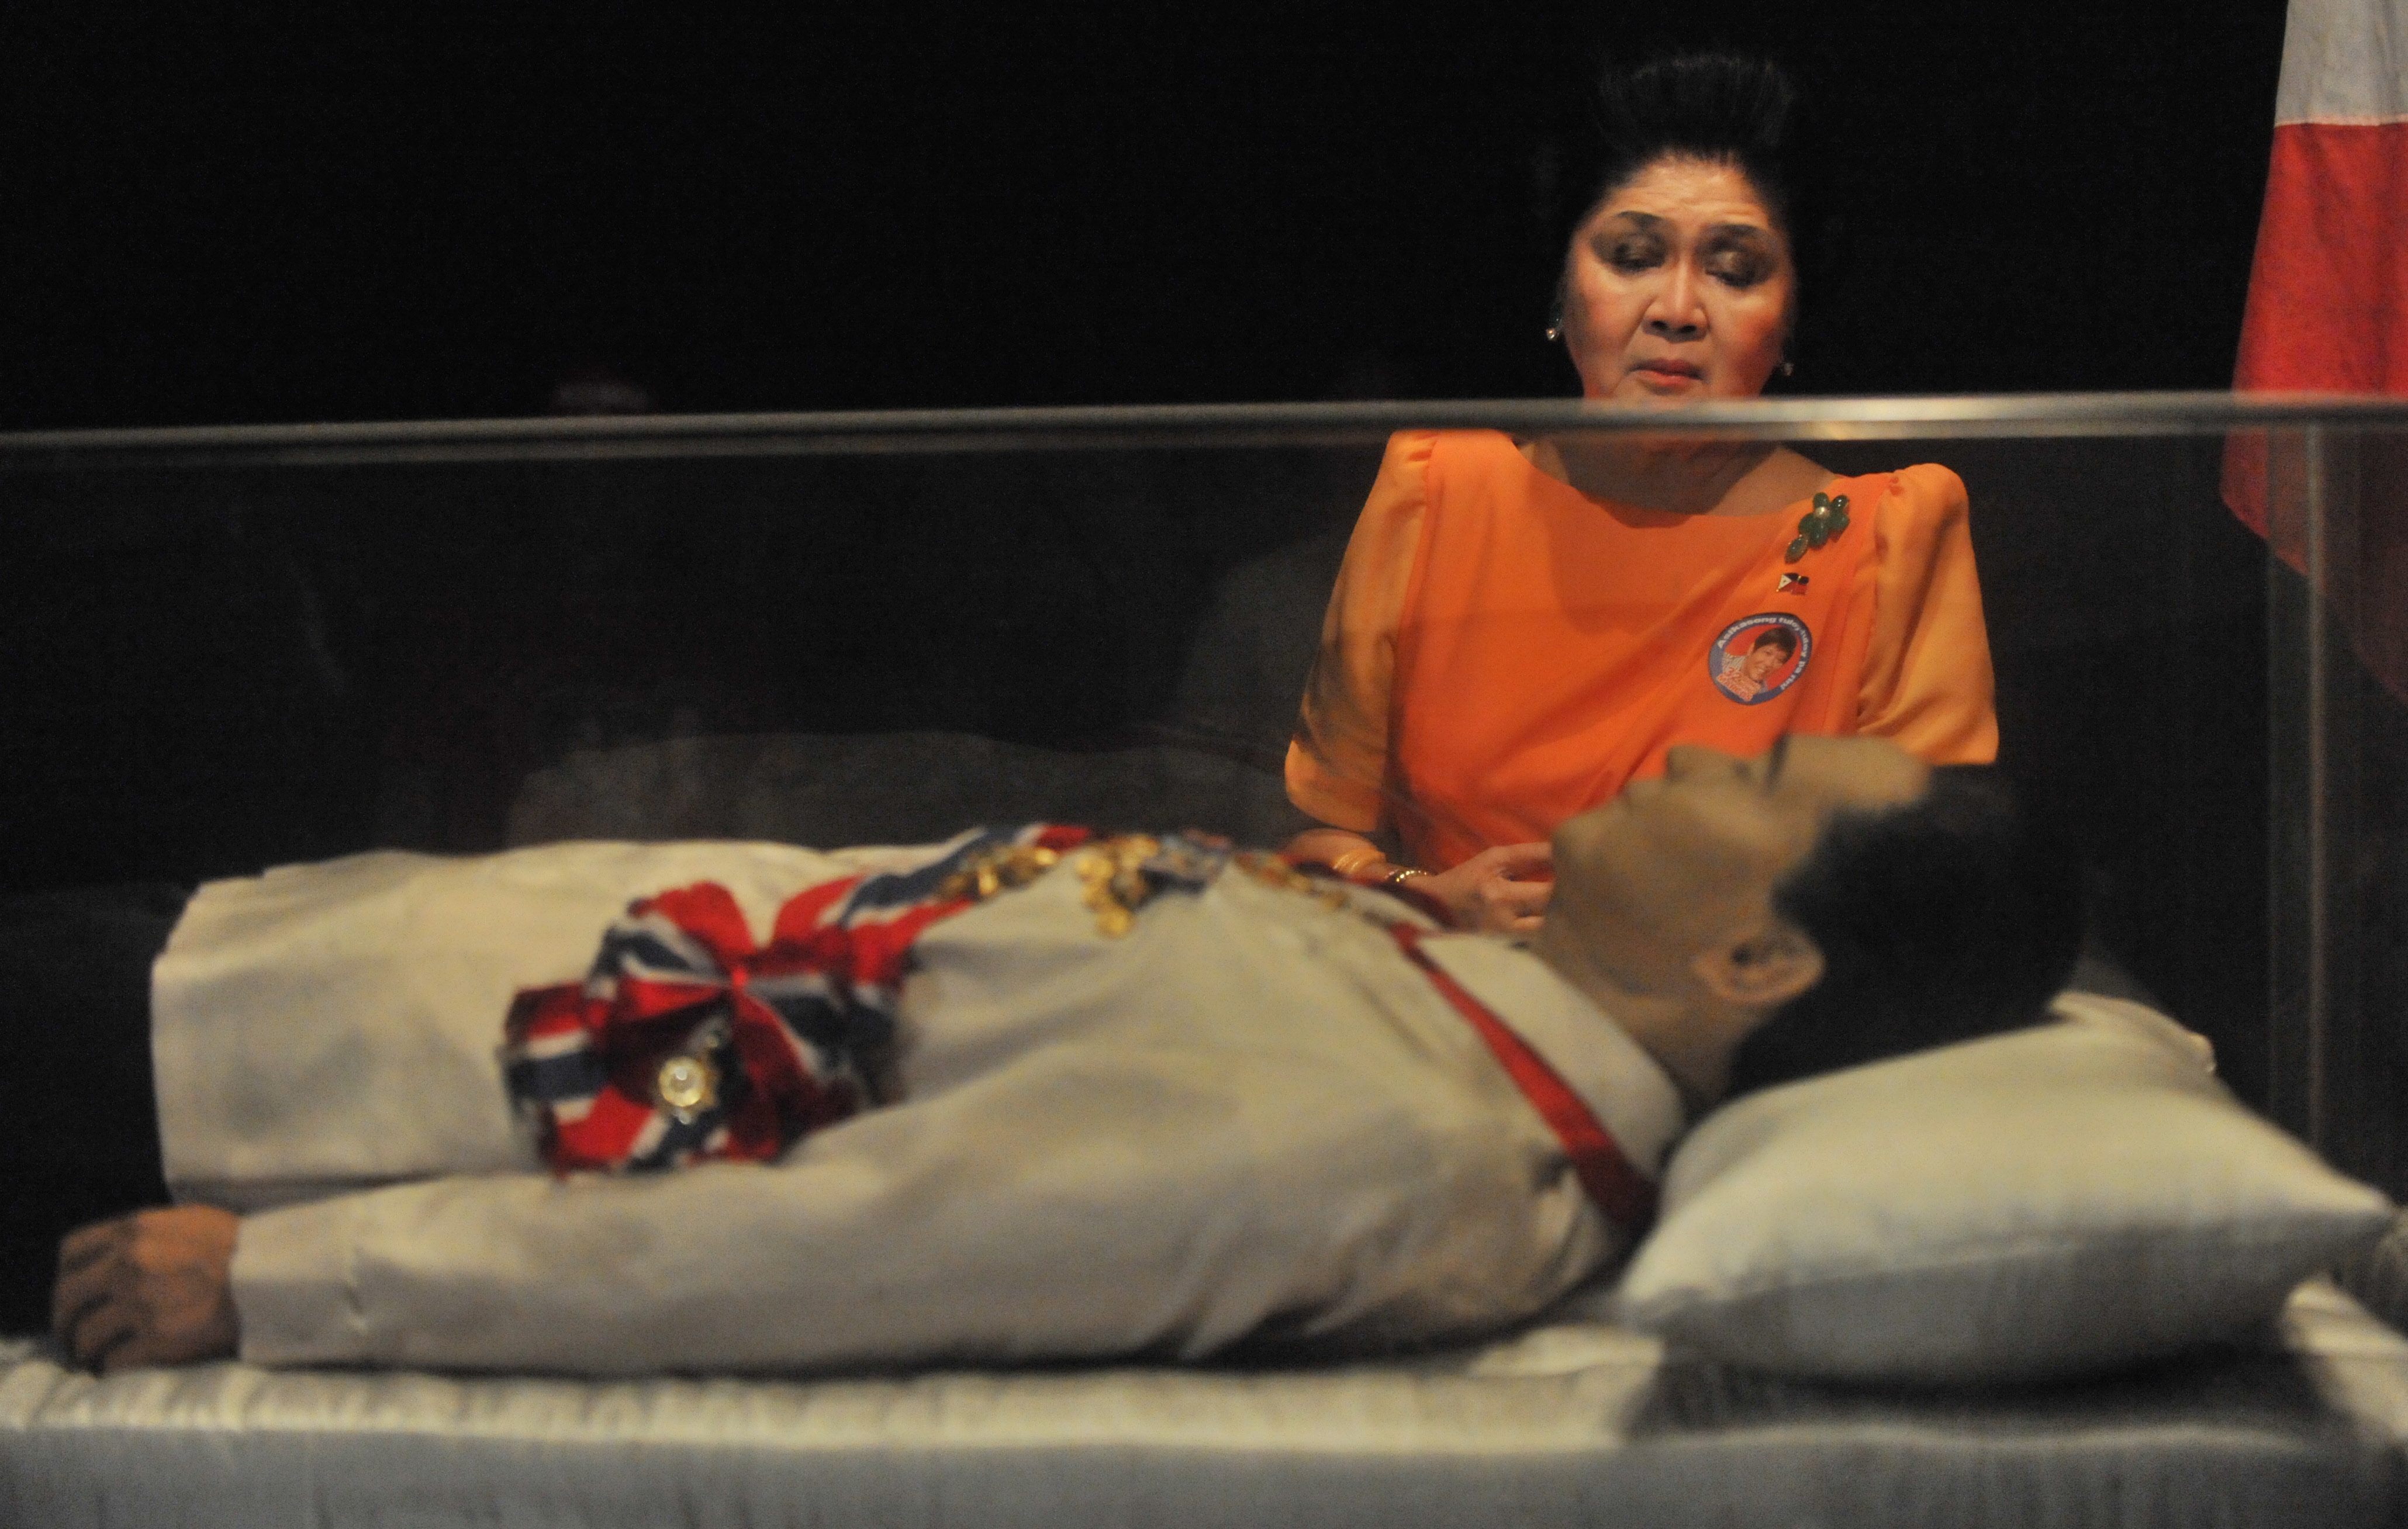 (FILES) This file photo taken on March 26, 2010 shows former Philippine first lady Imelda Marcos looking at the embalmed body of her husband former leader Ferdinand Marcos prior to an election campaign trip in the town of Batac, Ilocos norte province, north of Manila. Philippine activists and a historical body on August 8, 2016 criticised President Rodrigo Duterte's plan to give late dictator Ferdinand Marcos a hero's burial, saying the ex-leader lied about his military record. / AFP PHOTO / TED ALJIBE